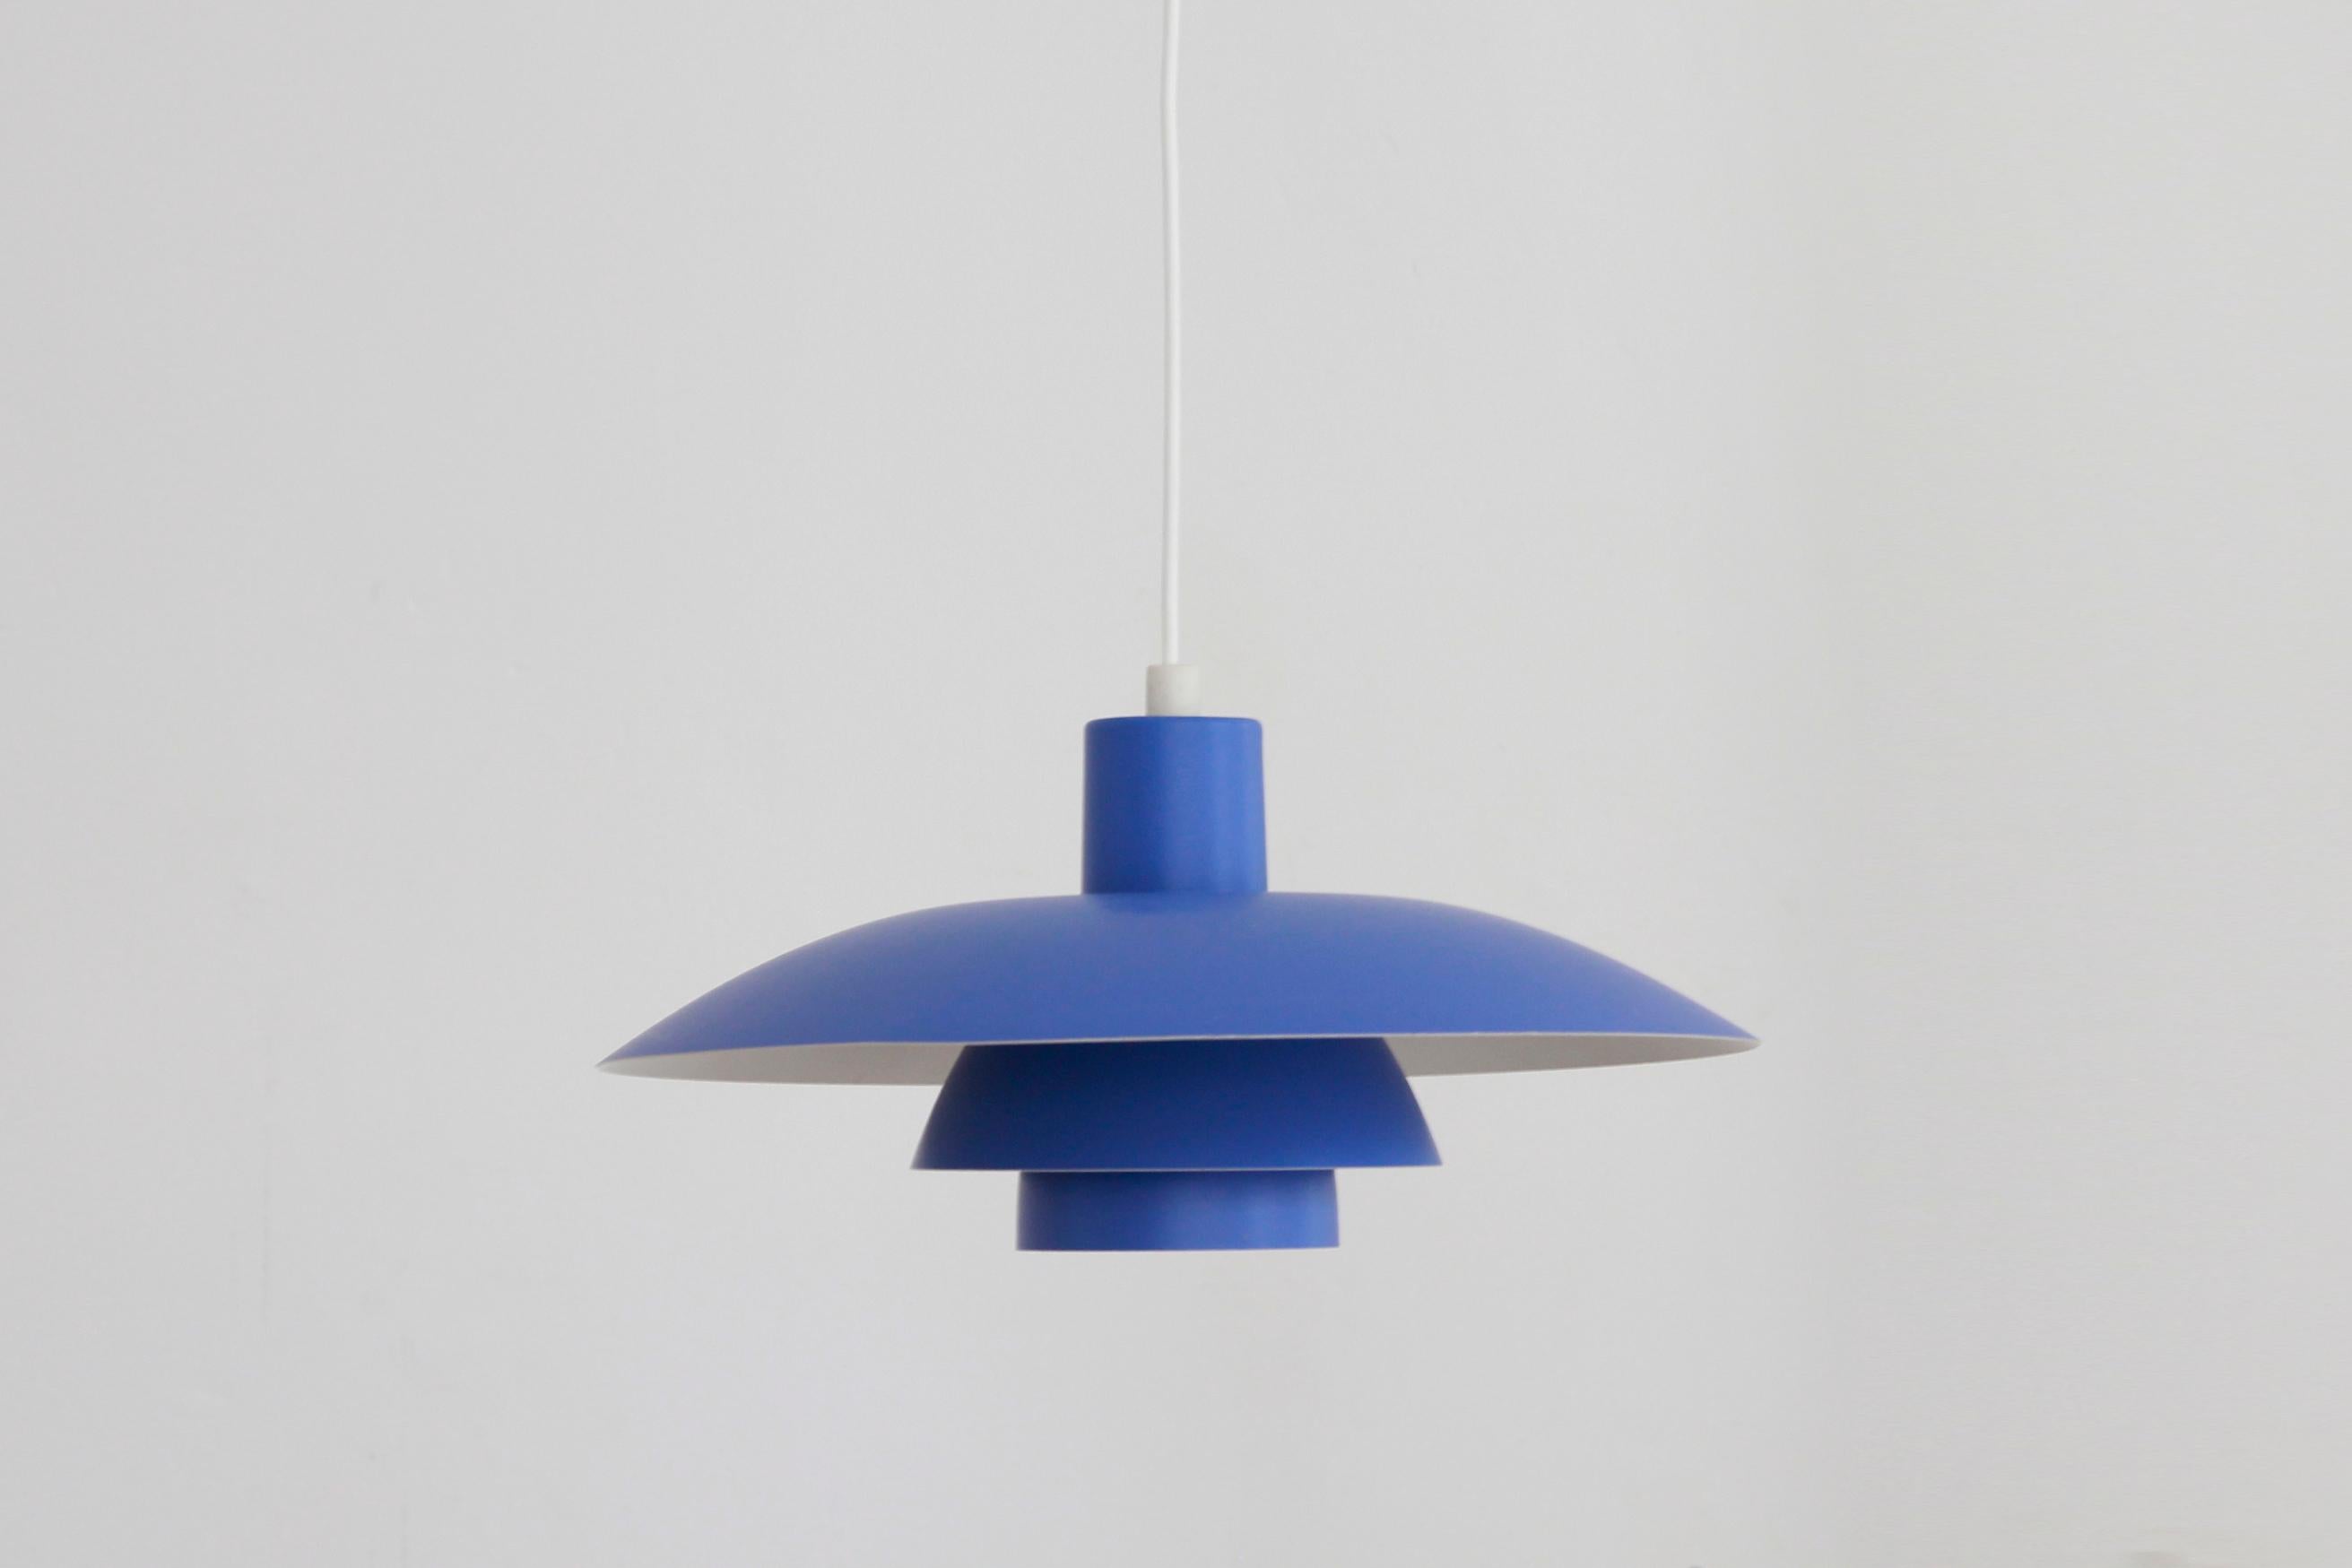 Beautiful vintage design hanging lamp by Poul Henningsen for Louis Poulsen in blue color. This lamp is called the PH 4/3. The lamp is designed in such a way that you have a maximum diffusion of light and minimal glare in your eyes. Measures: The